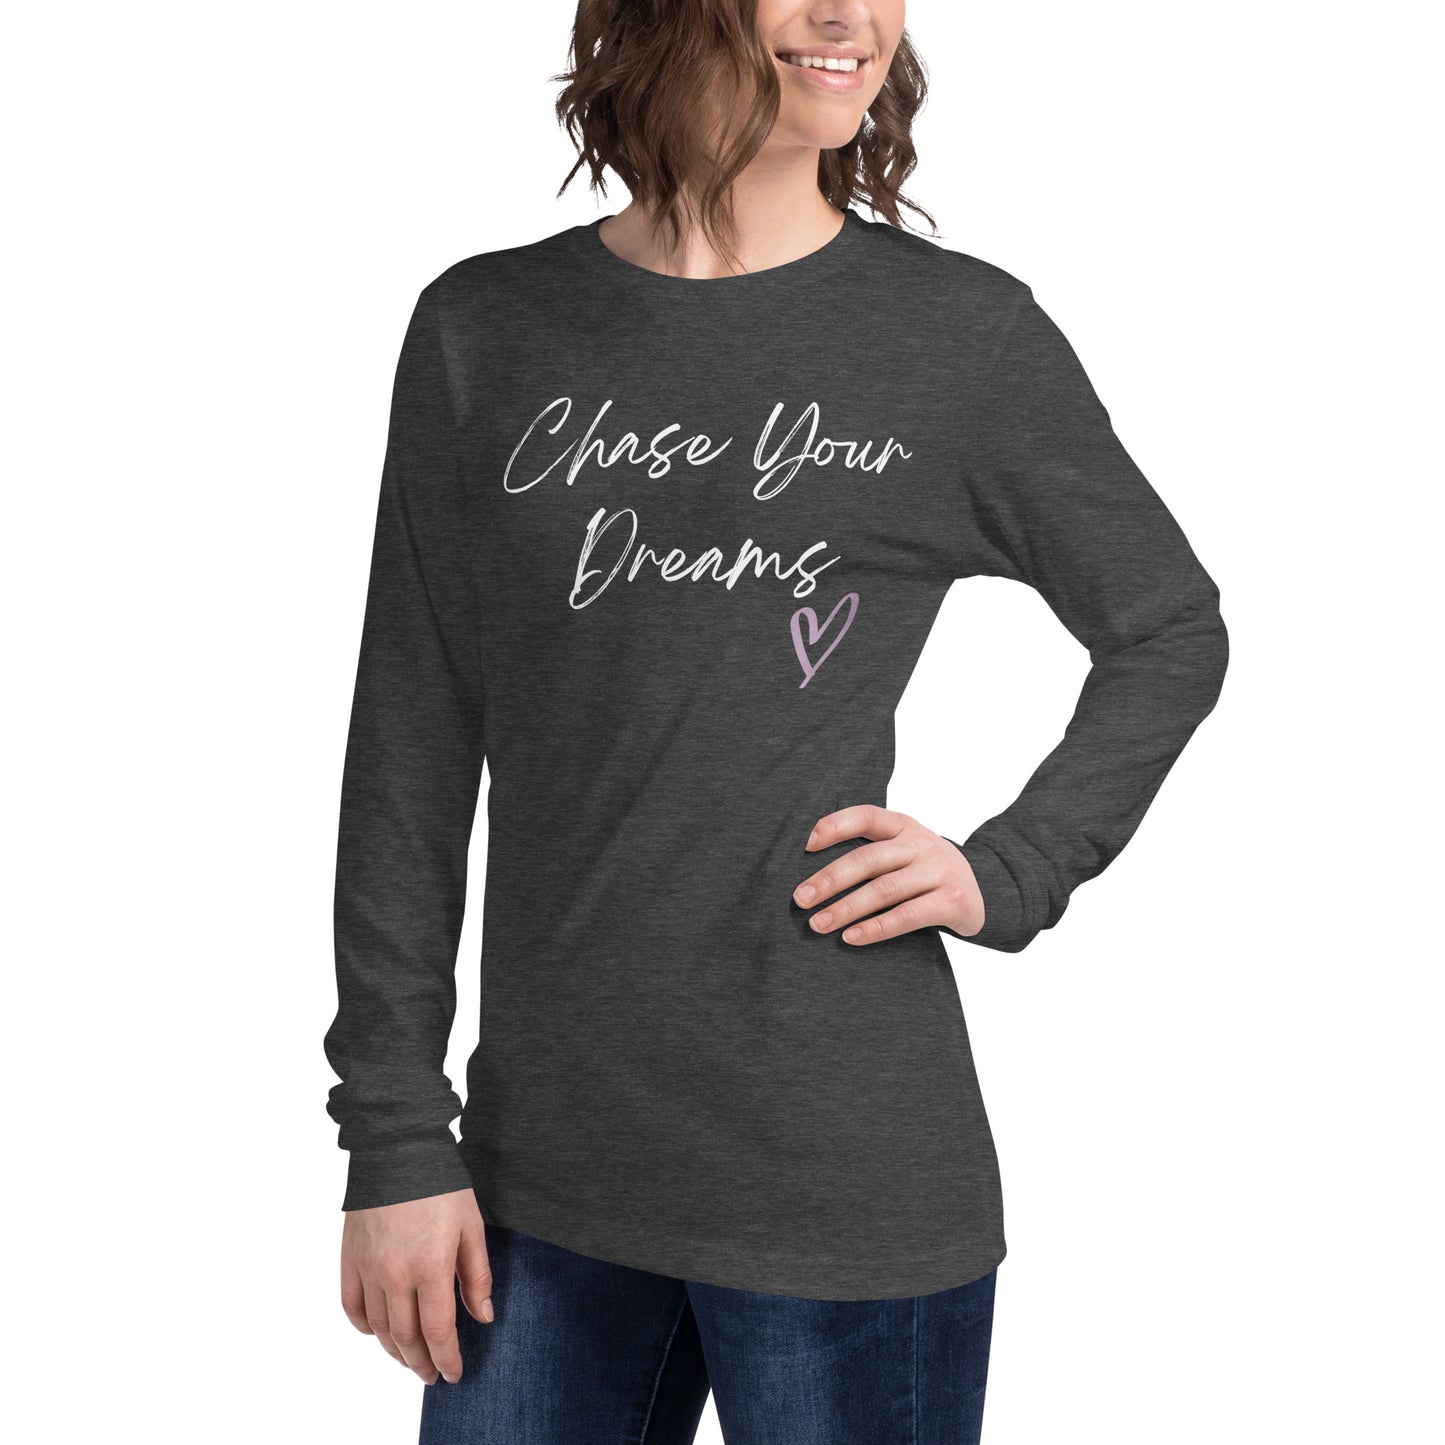 Chase Your Dreams Long Sleeve Tee